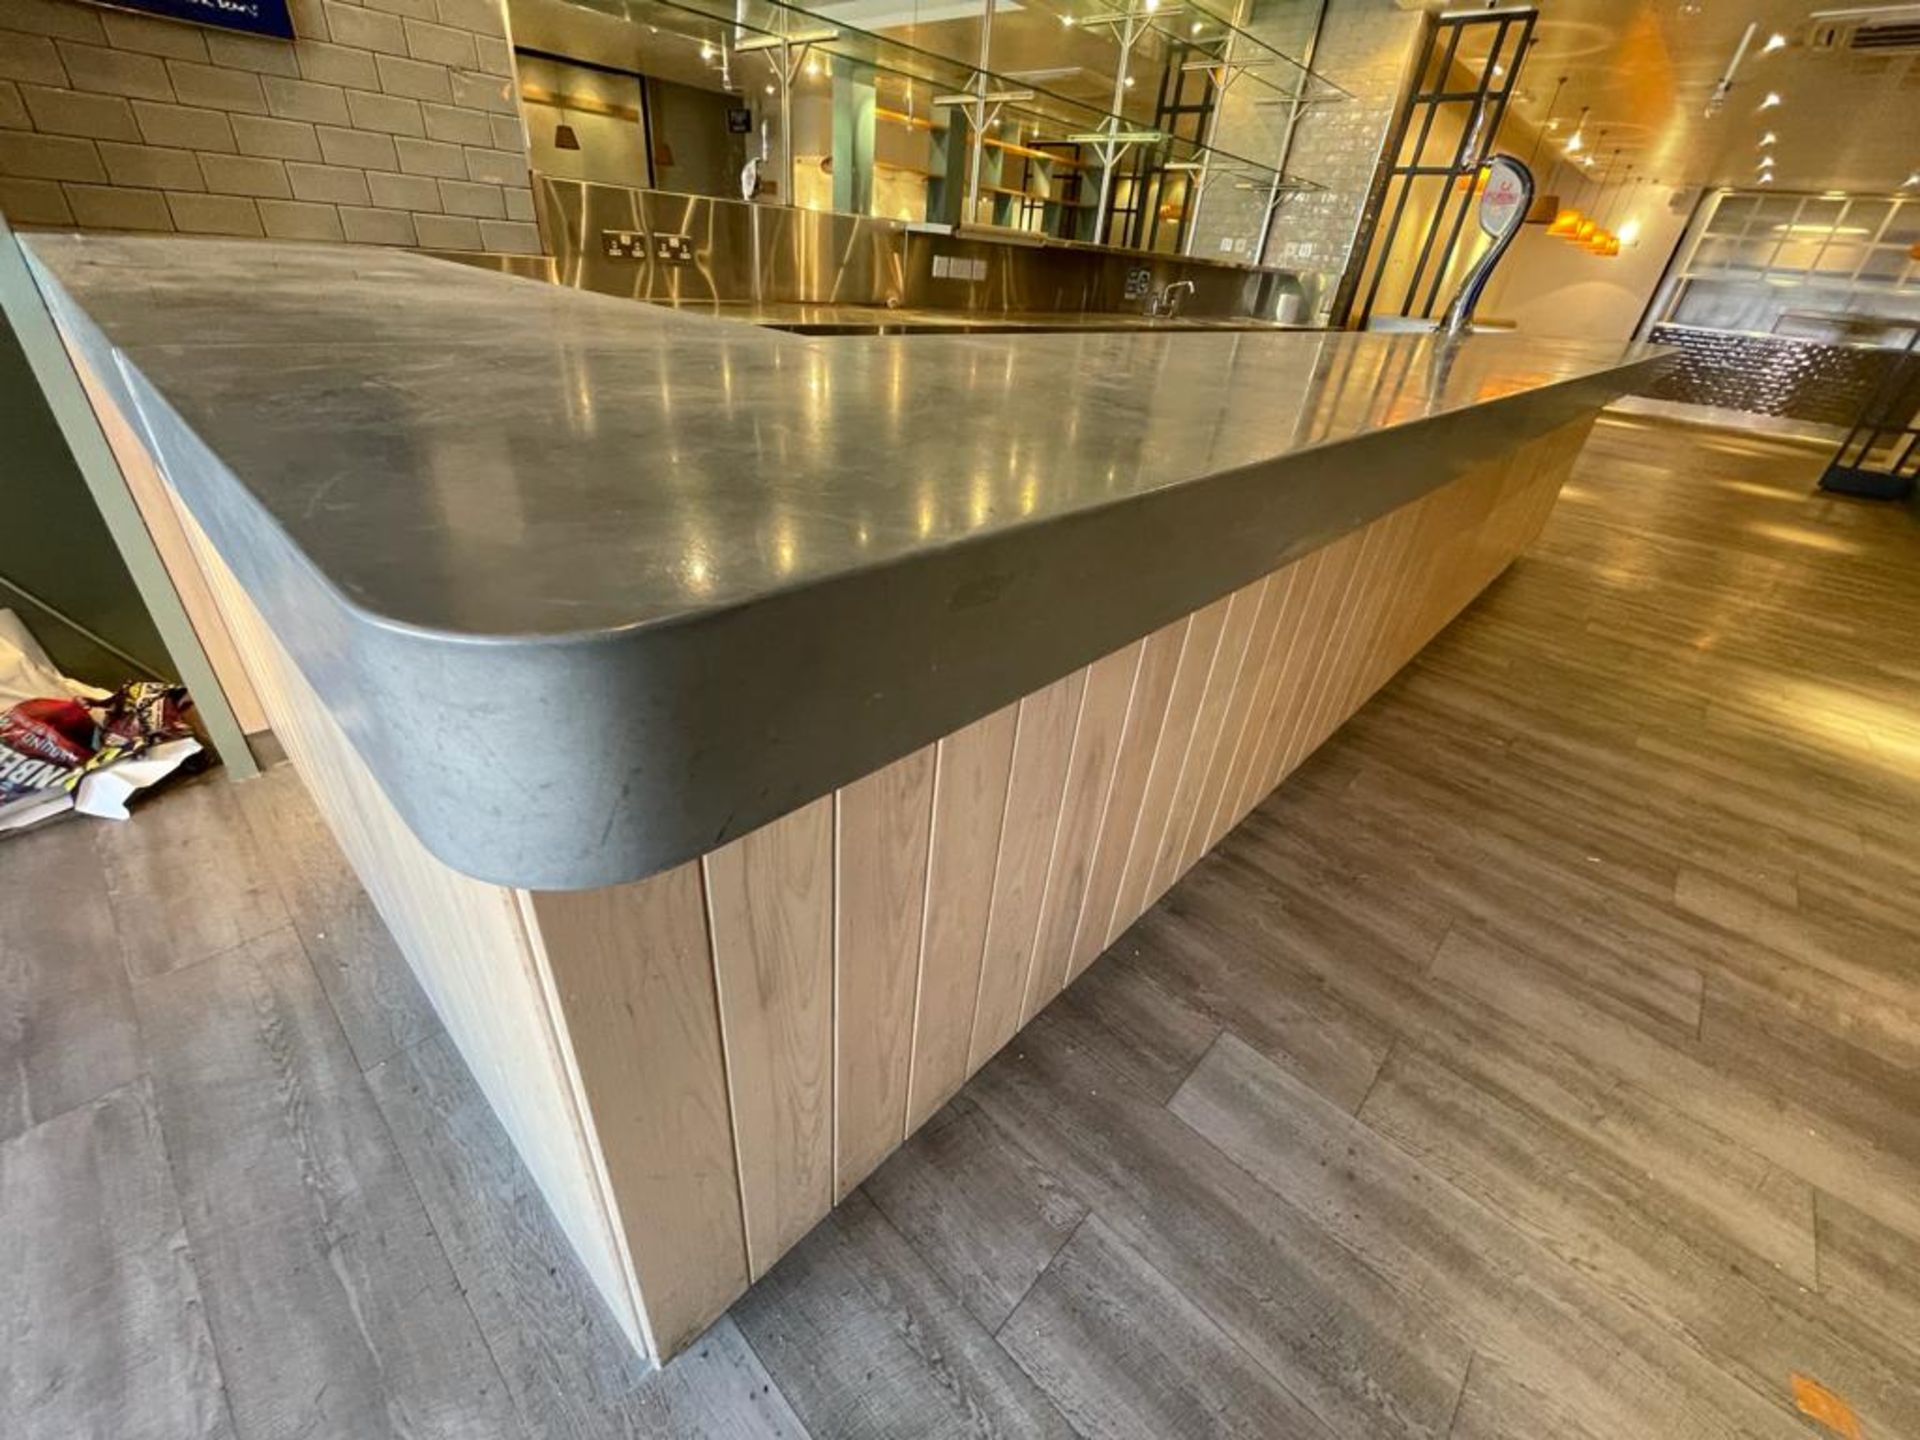 1 x Contemporary Restaurant Bar With Light Wood Panel Fascia, Sheet Metal Covered Bar Top, - Image 21 of 57